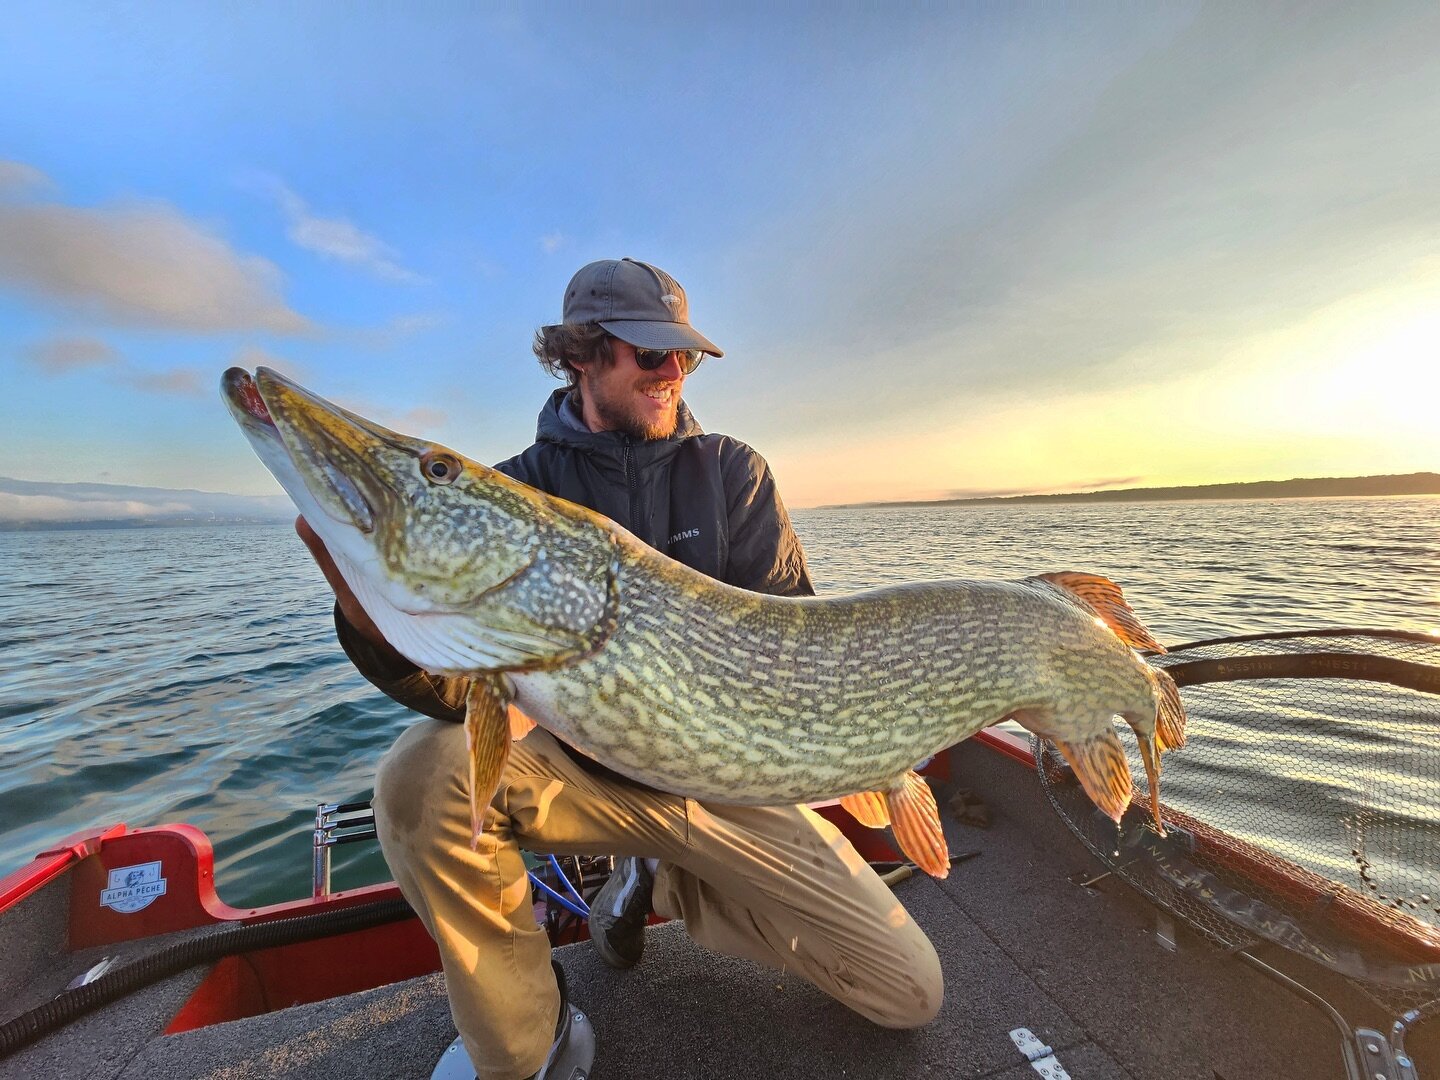 Tb to an amazing day on a big alpine lake ! 
Always a pleasure to go fishing with @fishing_switzerland_westin 🔥
.
.
.
#pike #pikefishing #bigpike #pikefishingswitzerland